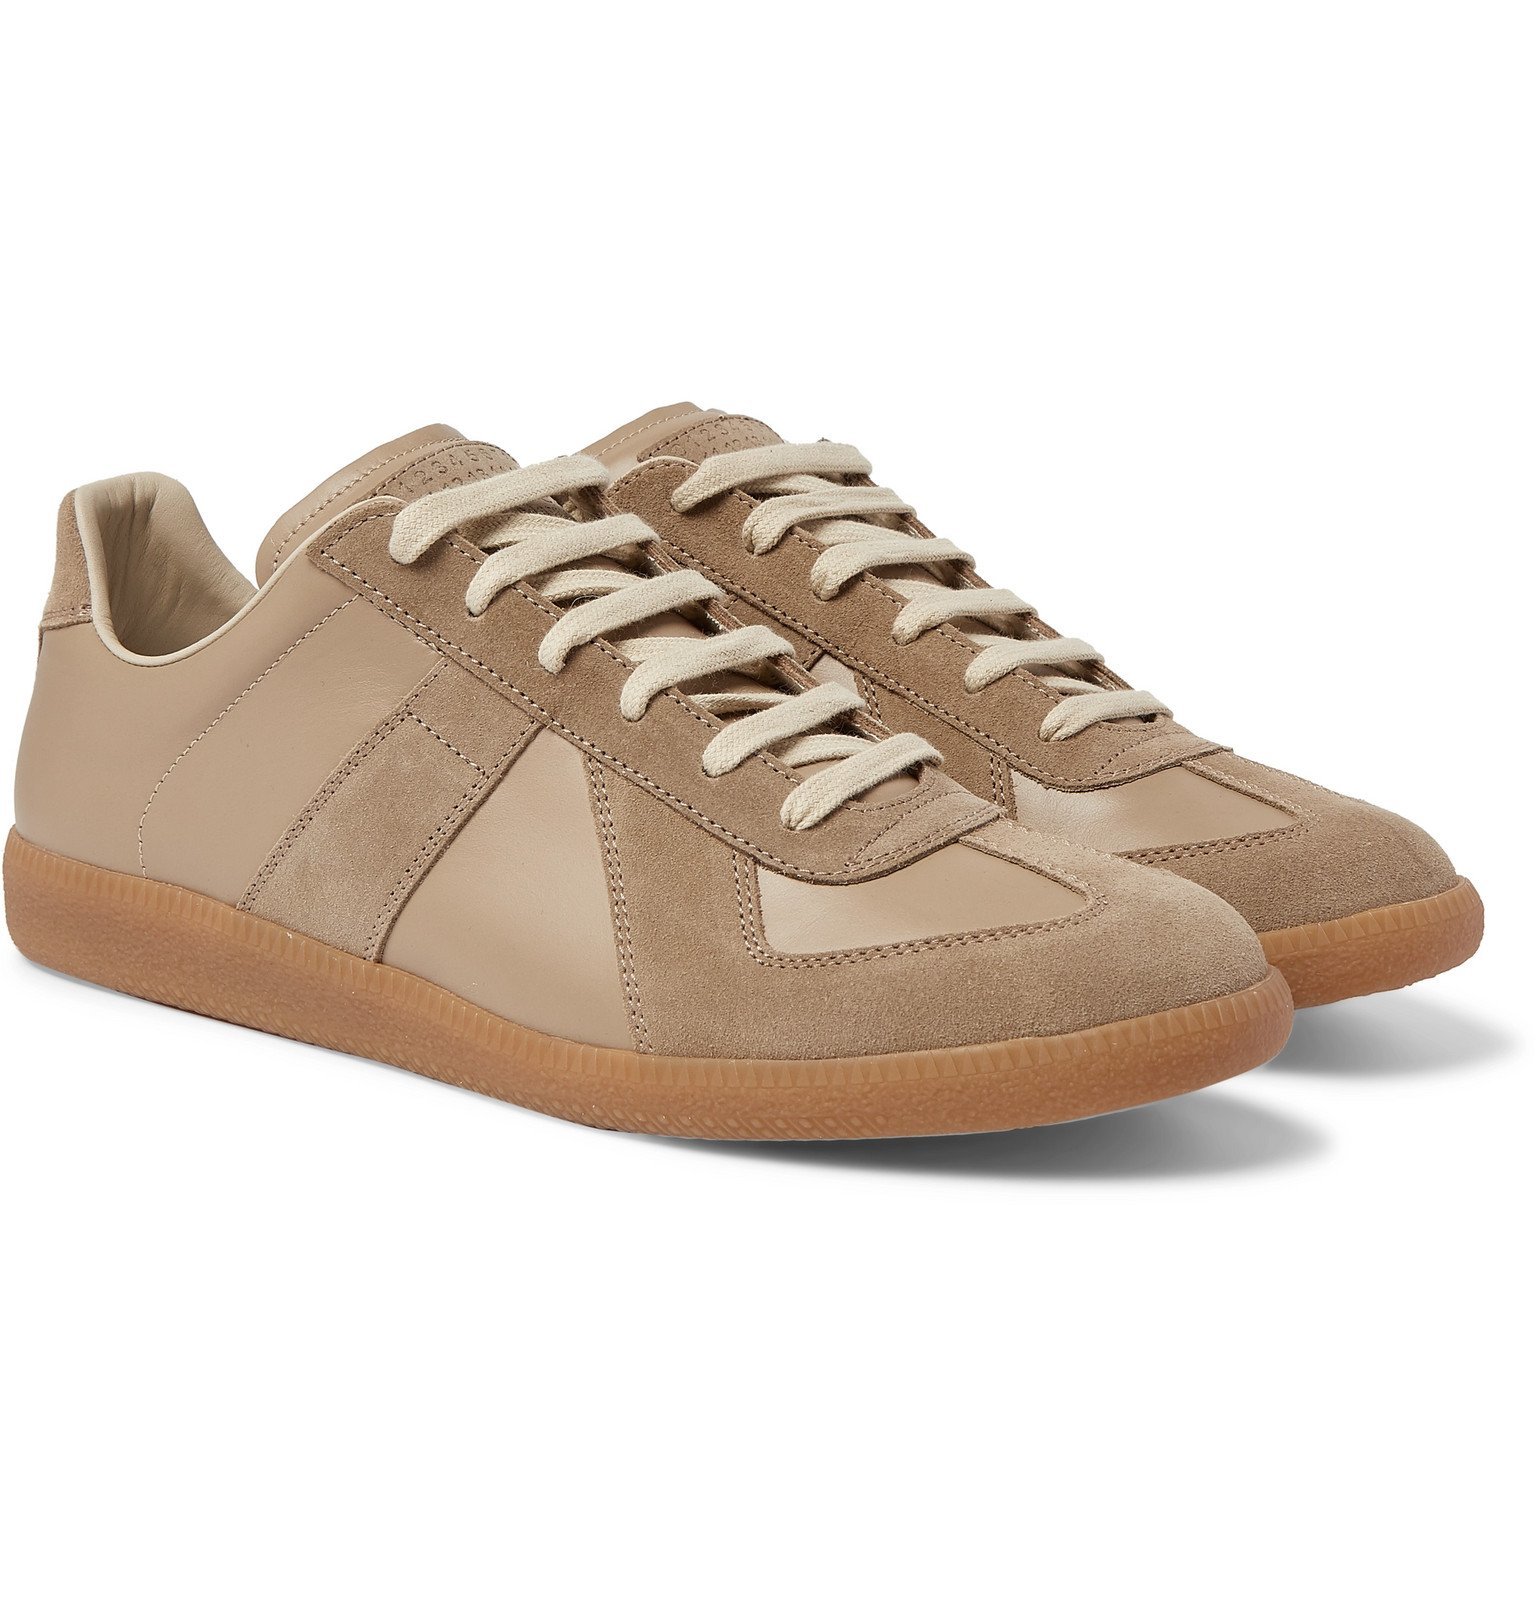 Maison Margiela - Replica Leather and Suede Sneakers - Brown Maison ...